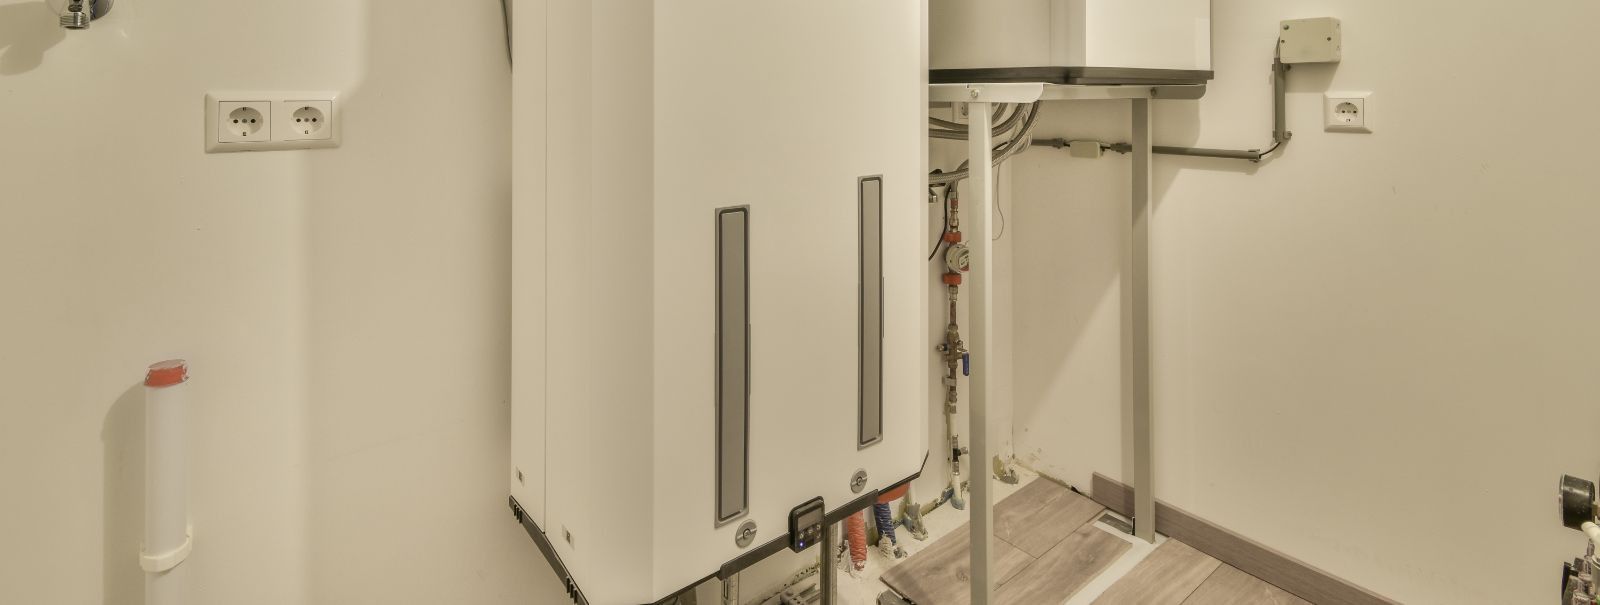 Gas boilers are a central component in home and business heating systems, providing the warmth needed for comfort and daily operations. They work by burning nat